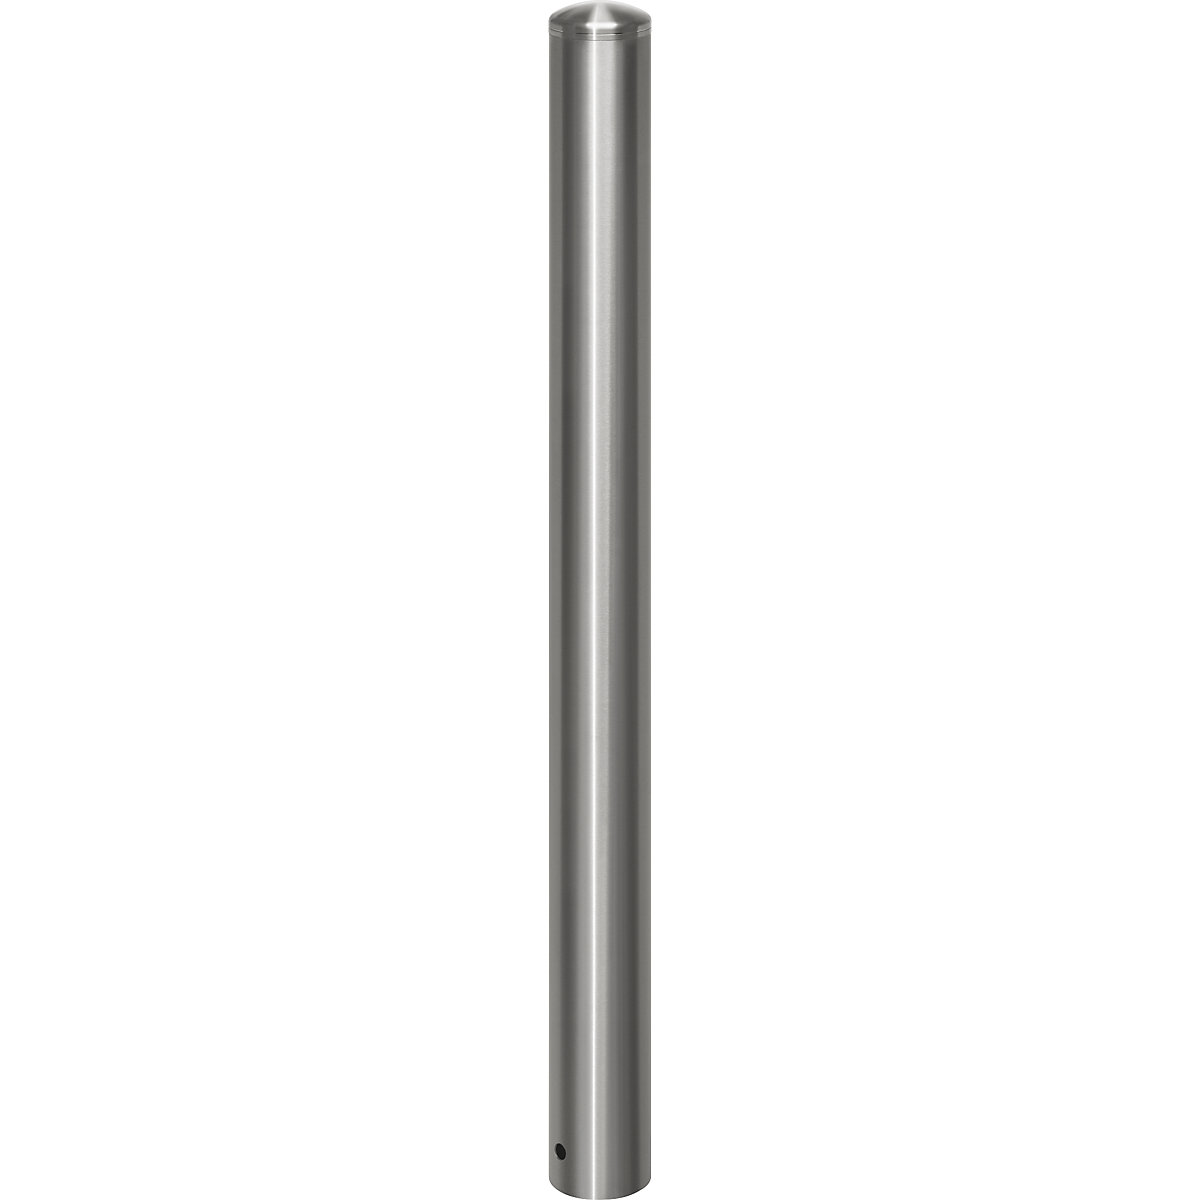 Stainless steel barrier post, with end cap, ground sleeve for concreting in, Ø 102 mm-5